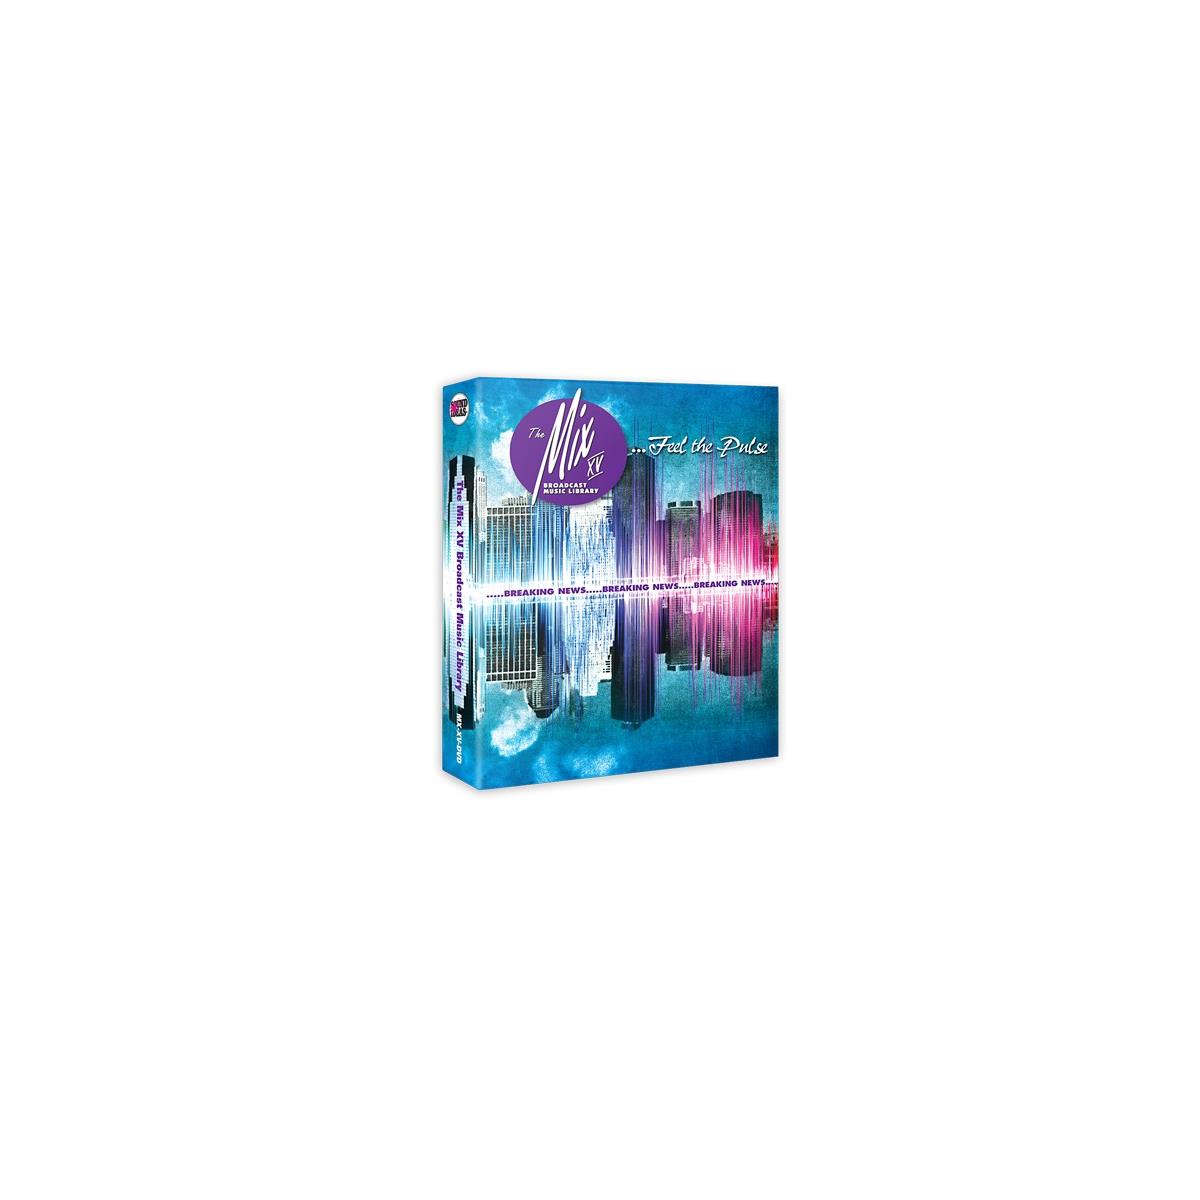 Image of Sound Ideas Mix XV Broadcast Music Library on DVDs